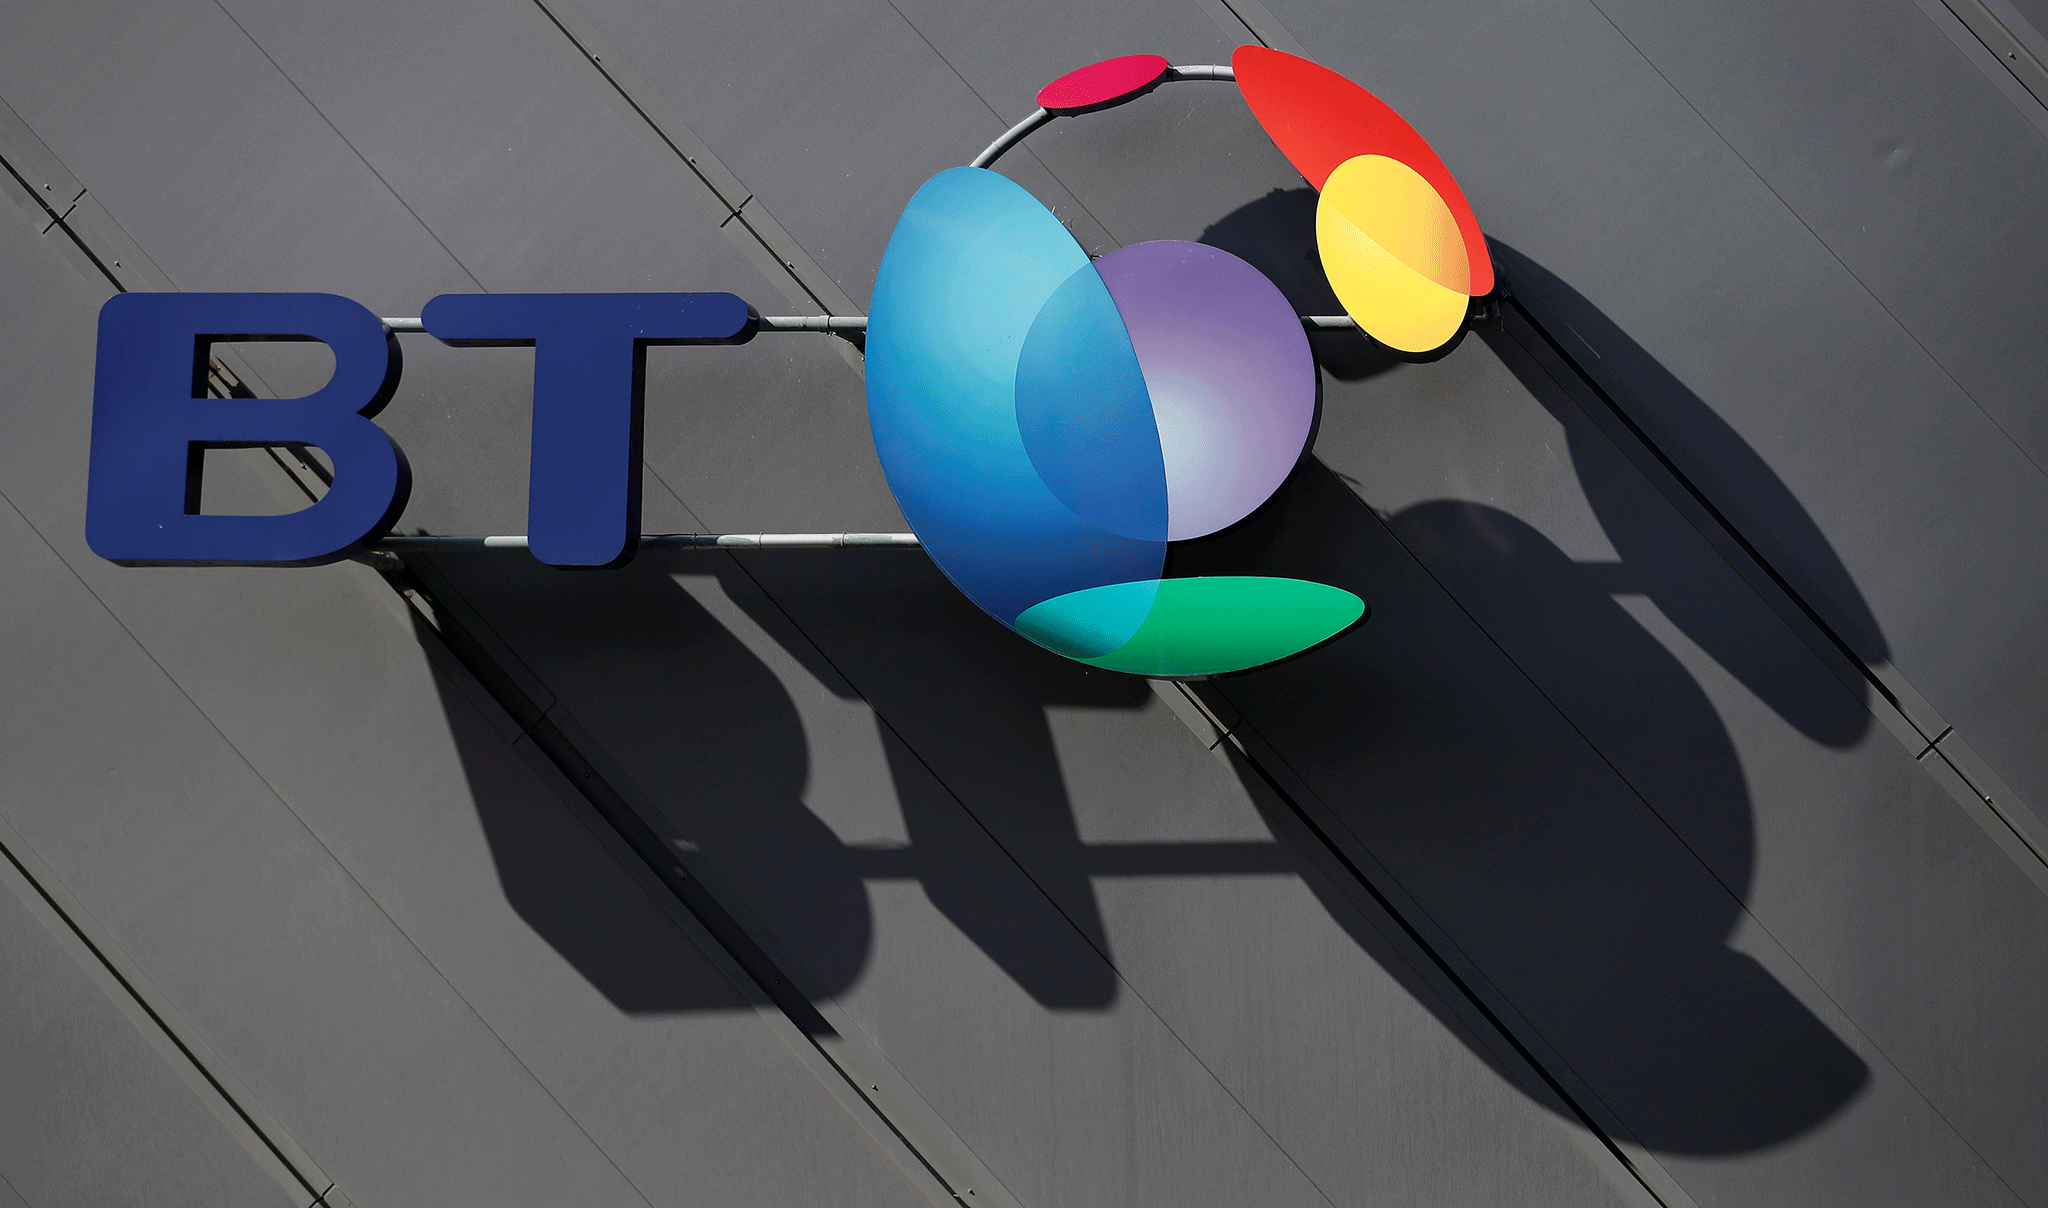 BT’s shares have had a shadow cast over them by its Italian misadventures